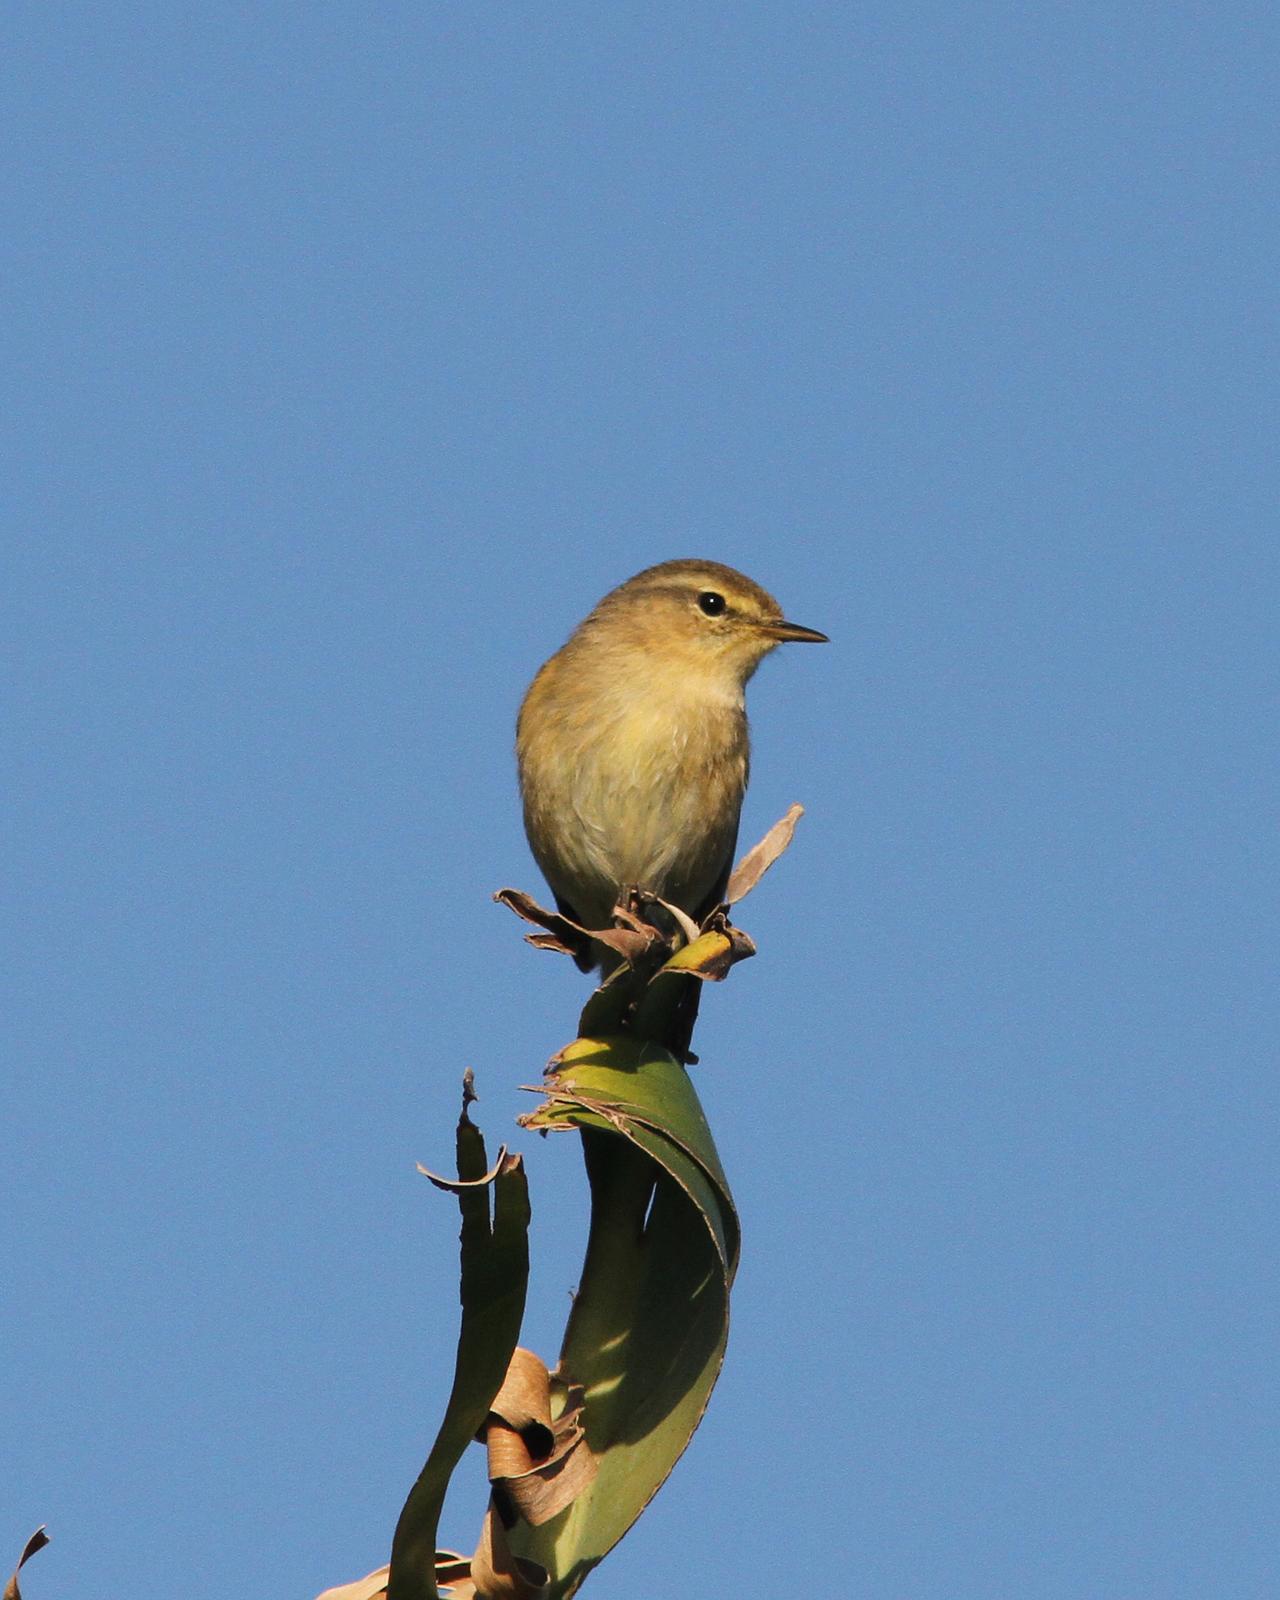 Canary Islands Chiffchaff Photo by Henk Baptist